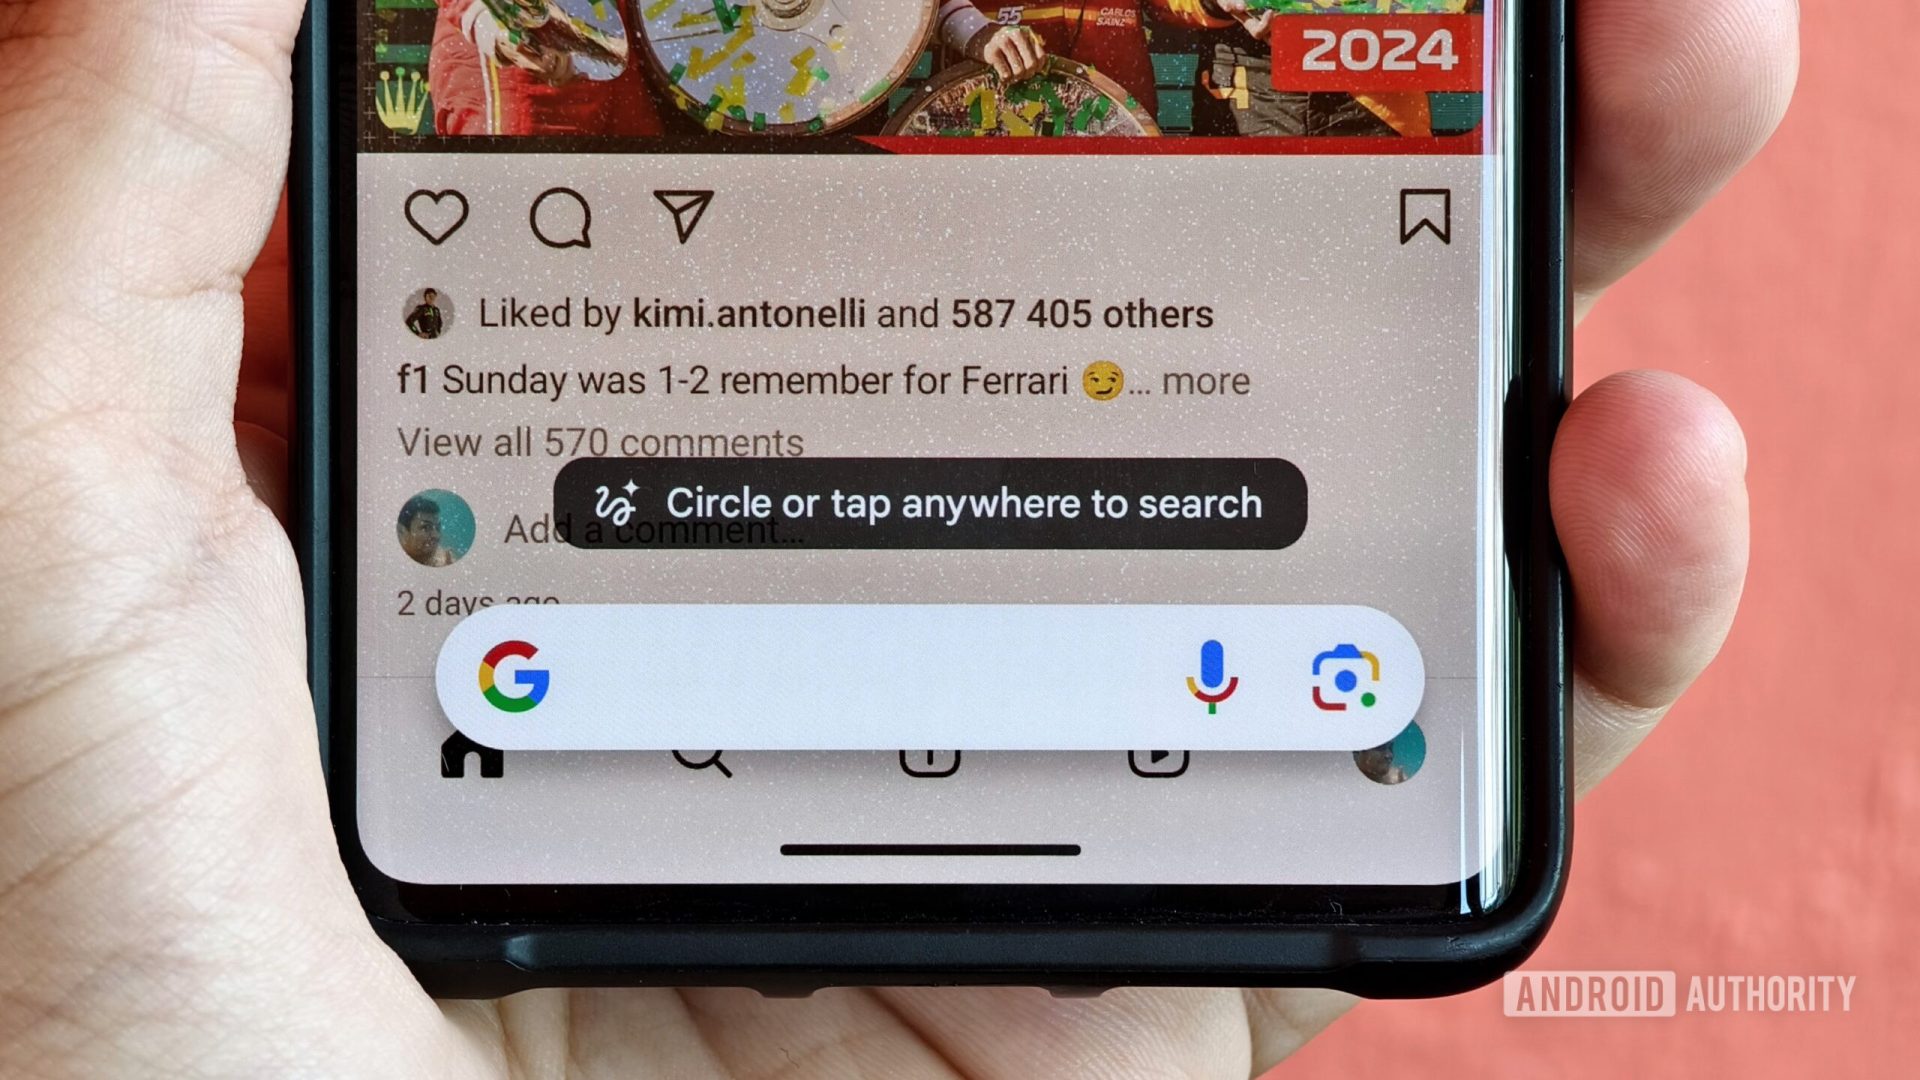 Circle to Search could soon get three new features (APK teardown)